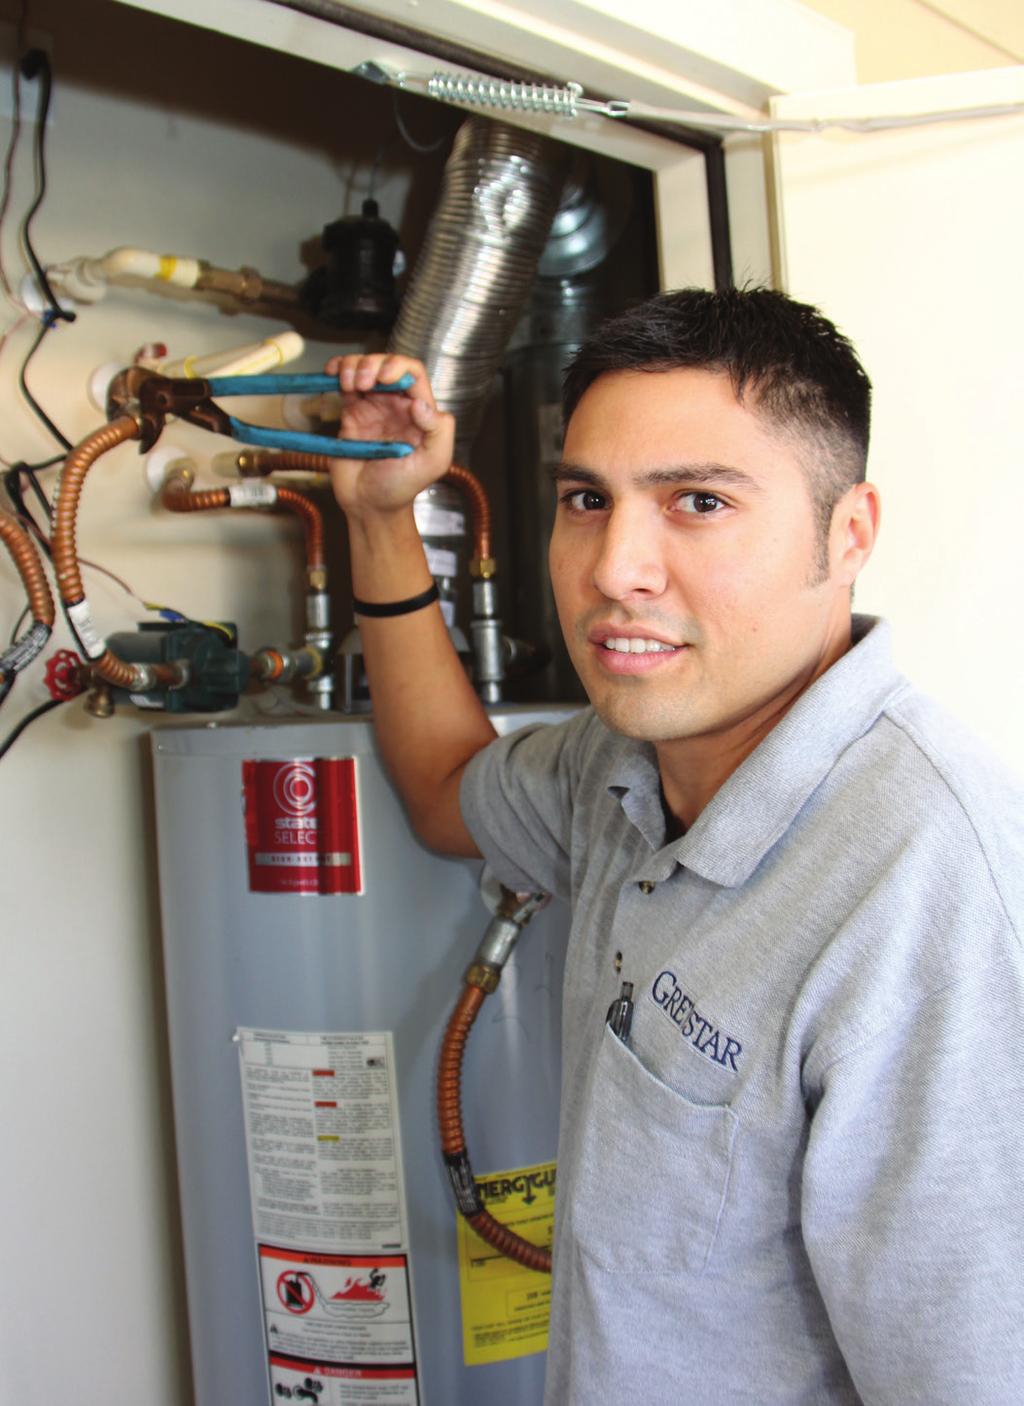 Maintenance Technician Job Description A Maintenance Technician is responsible for keeping the appearance of the property in excellent condition, both inside and out. There are no typical days.